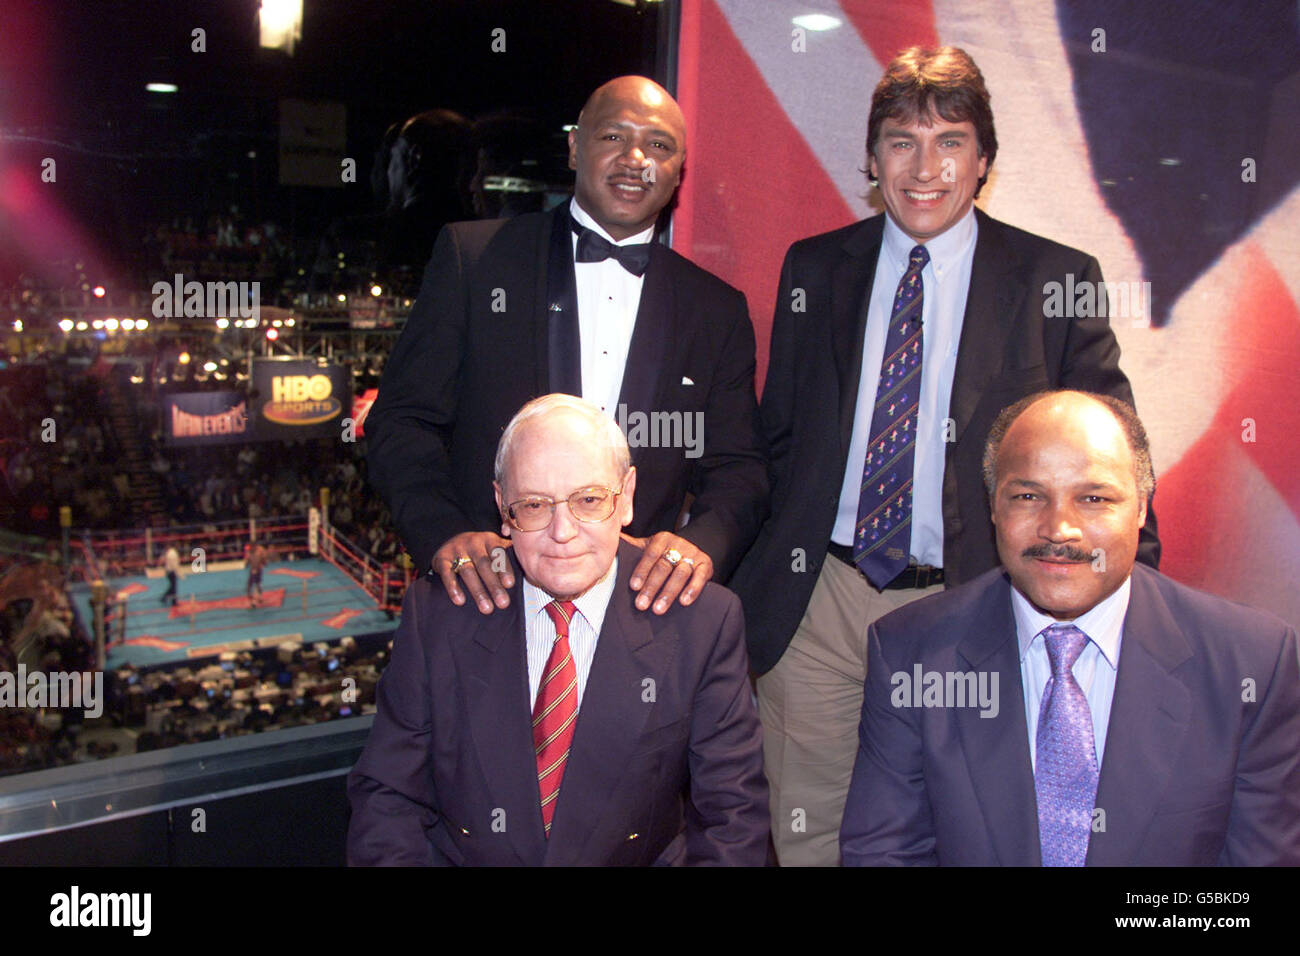 The BBC Boxing team Back row (L-R) Marvin Hagler, John Inverdale, Front row (L-R) Harry Carpenter and John Conteh at Carnival City, Johannesberg, ahead of the World Heavyweight Title fight between champion